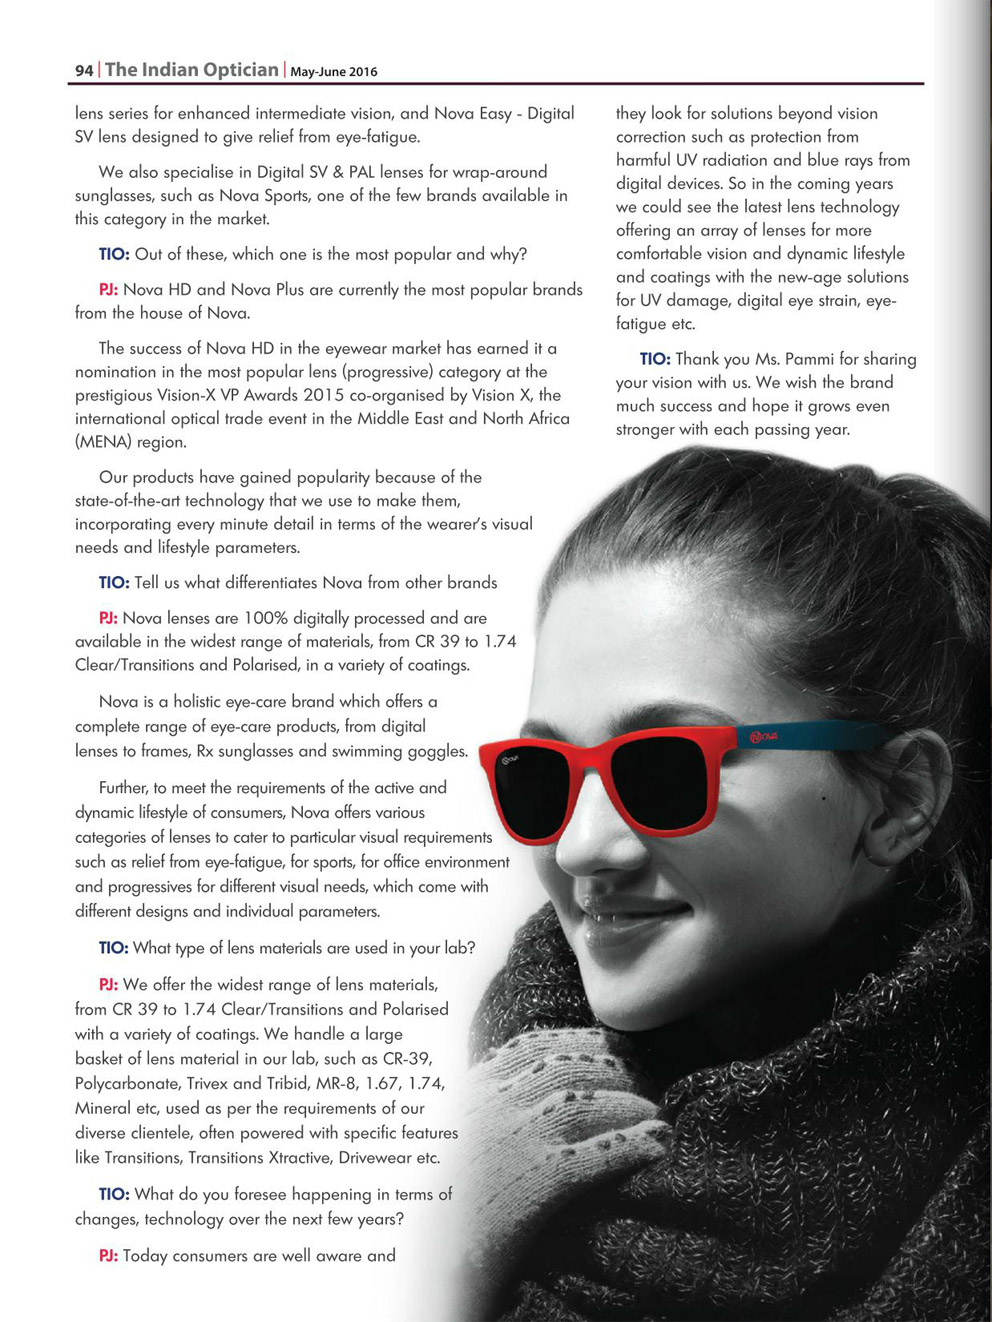 The Indian Optician page 3/6